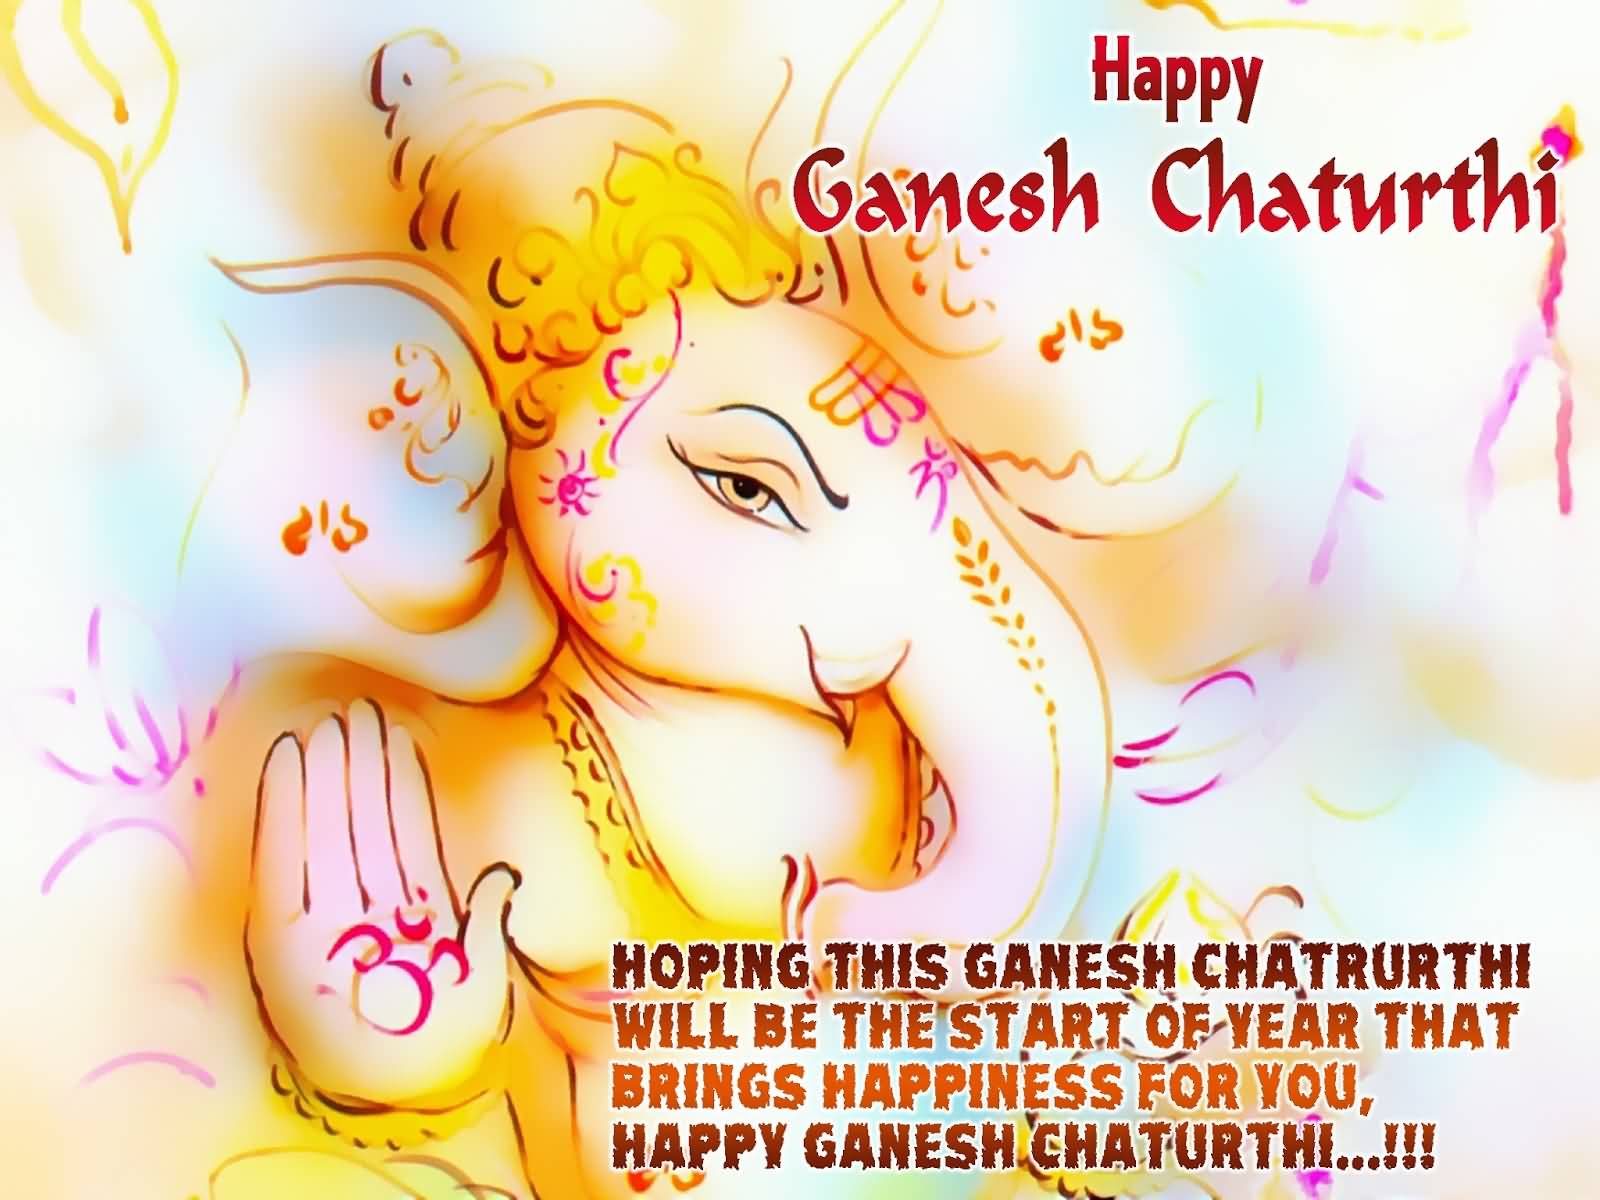 Happy Ganesh Chaturthi Hoping This Ganesh Chaturthi Will Be The Start Of Year That Brings Happiness For You, Happy Ganesh Chaturthi